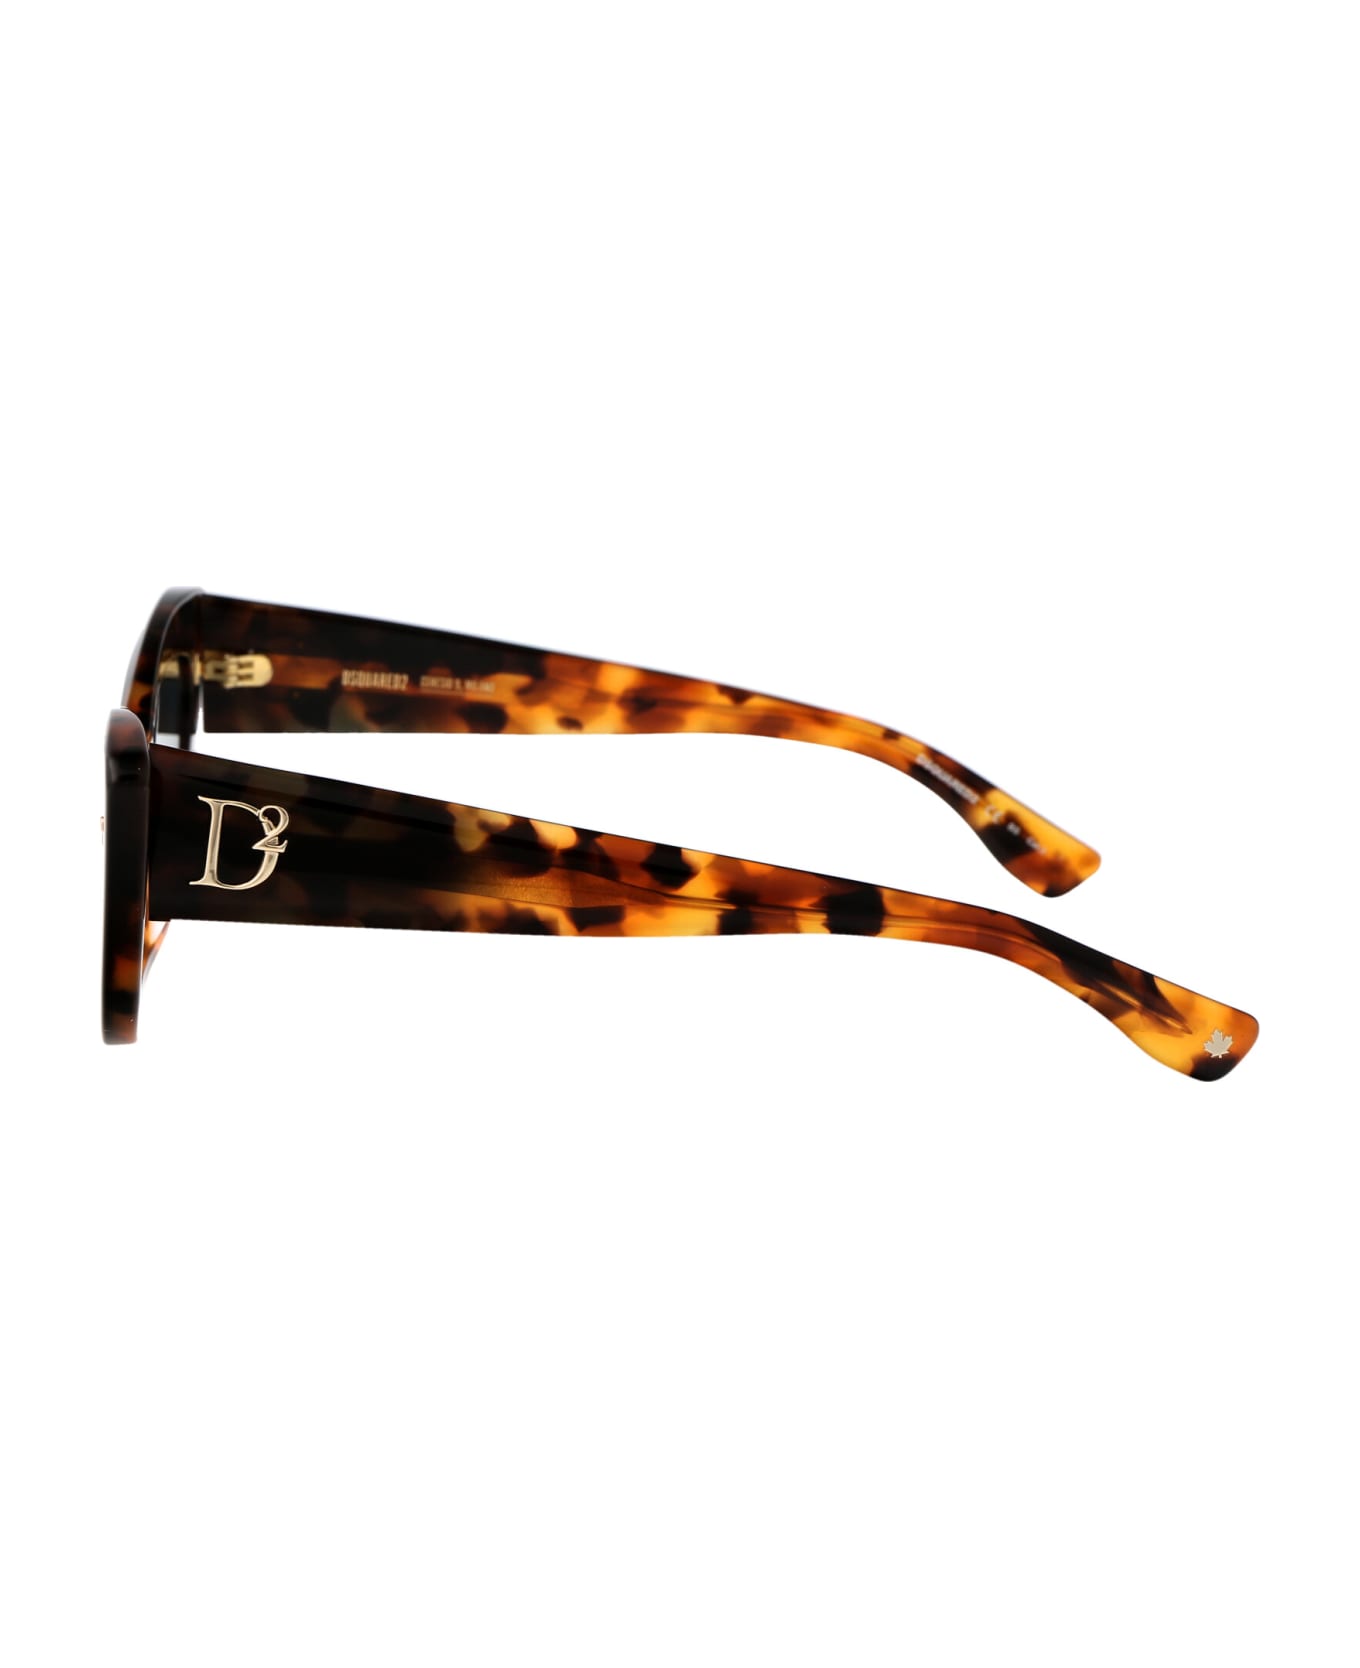 Dsquared2 Eyewear D2 0092/s Sunglasses - HAWKERS Diamond CLASSIC ROUNDED Sunglasses for Men and Women UV400